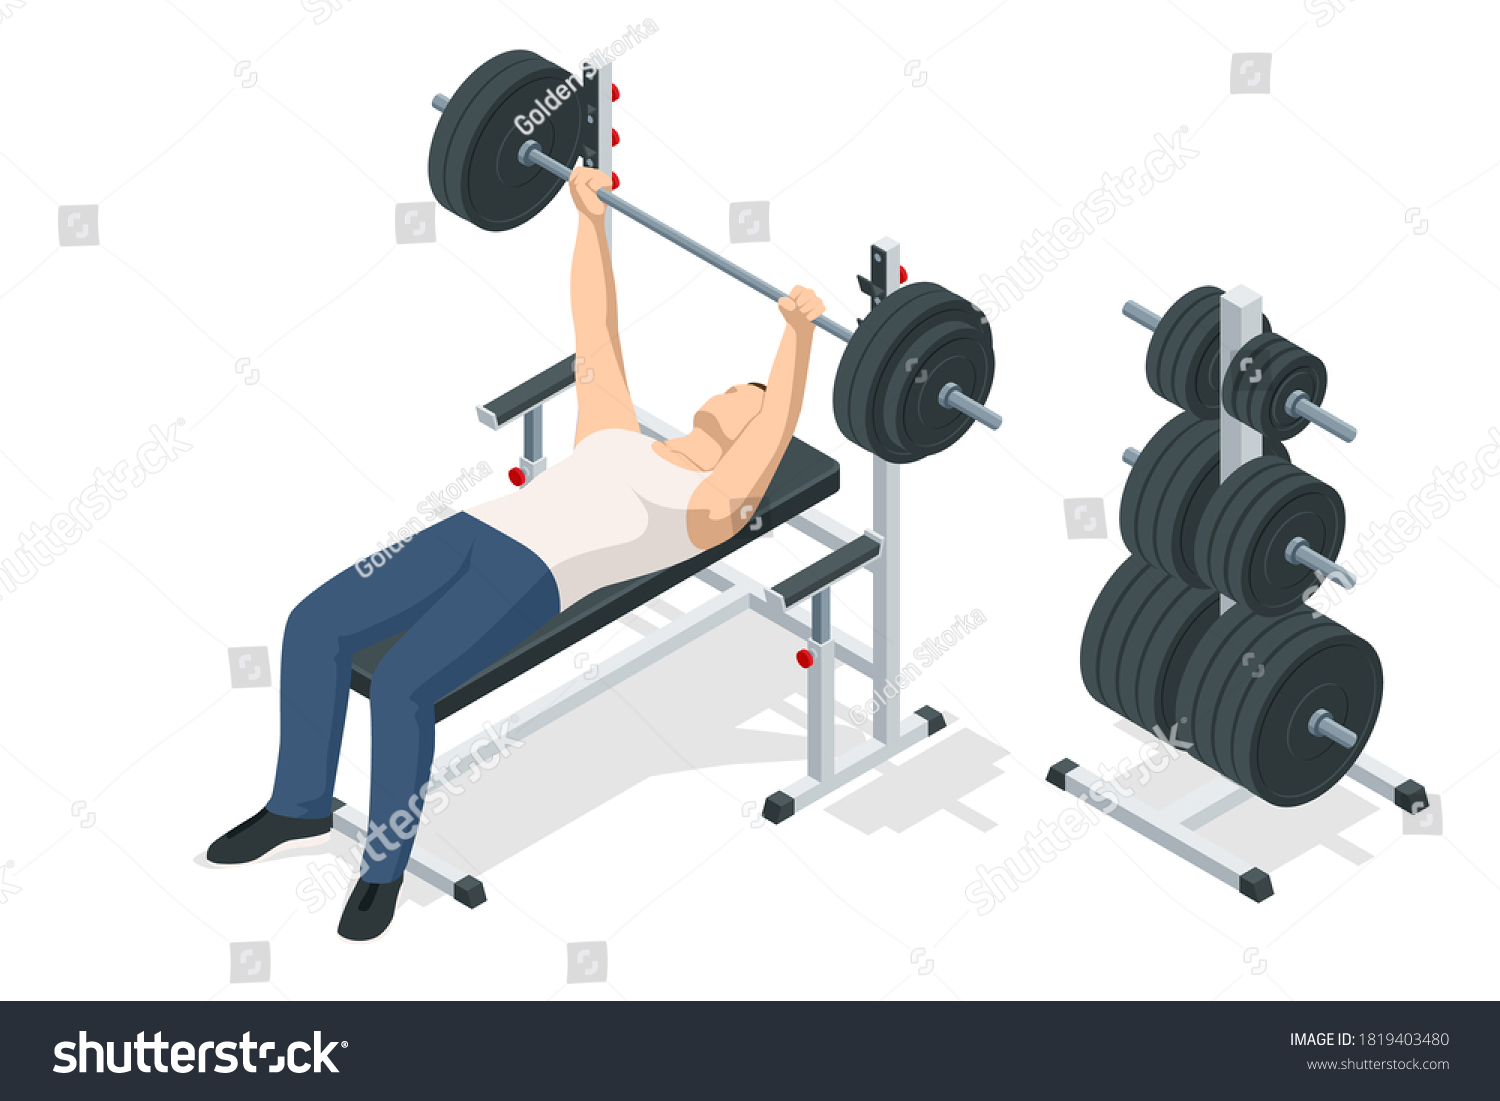 SVG of Isometric Man In Gym Exercising On The Bench Press. Sports and healthy lifestyle svg